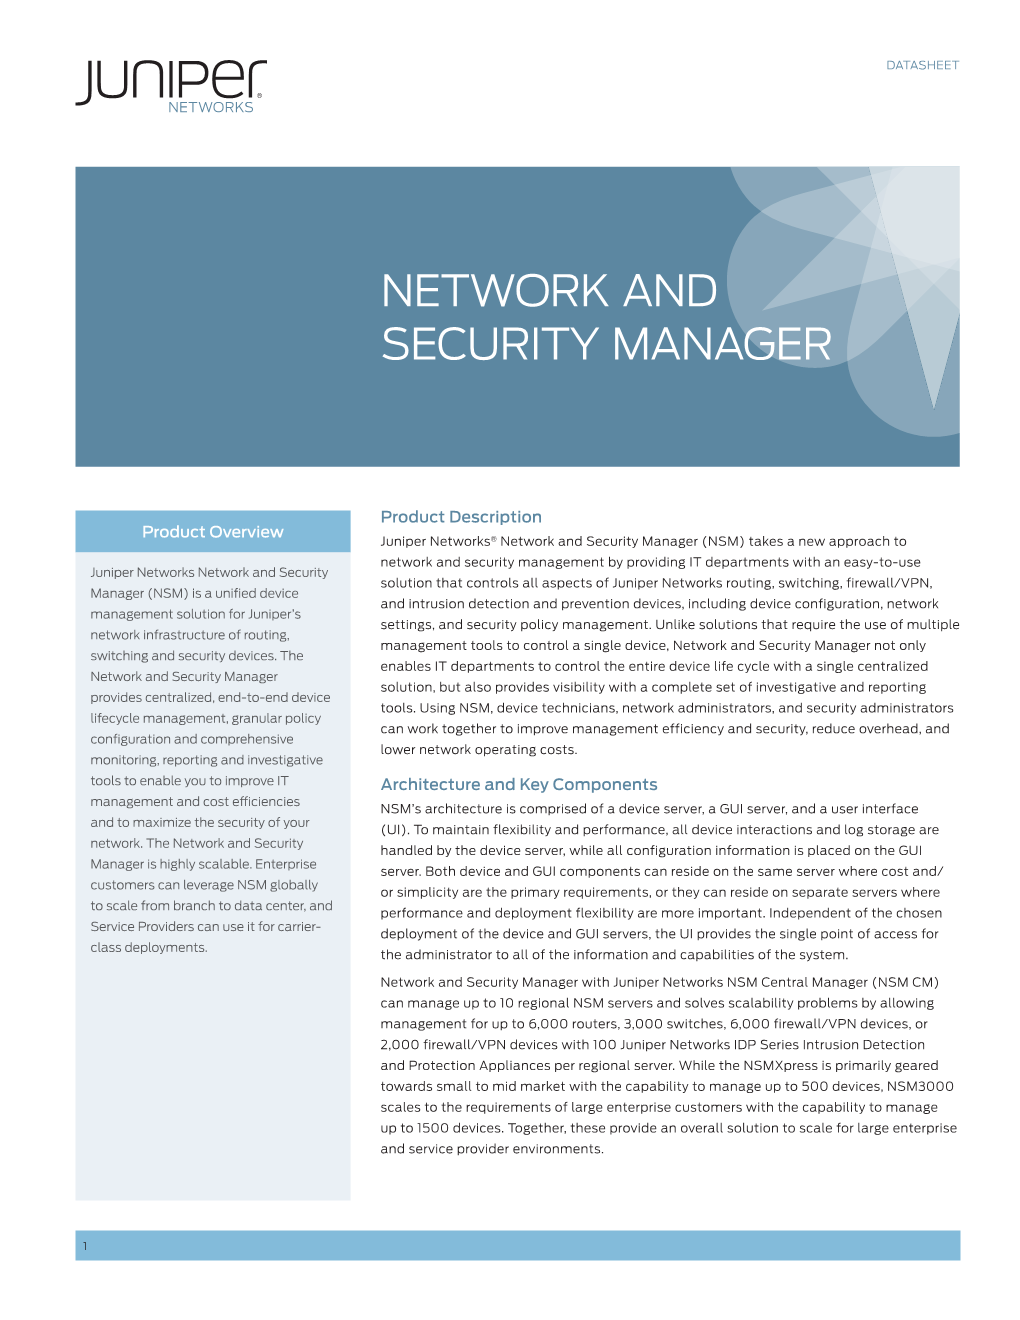 Juniper Networks Network and Security Manager Datasheet